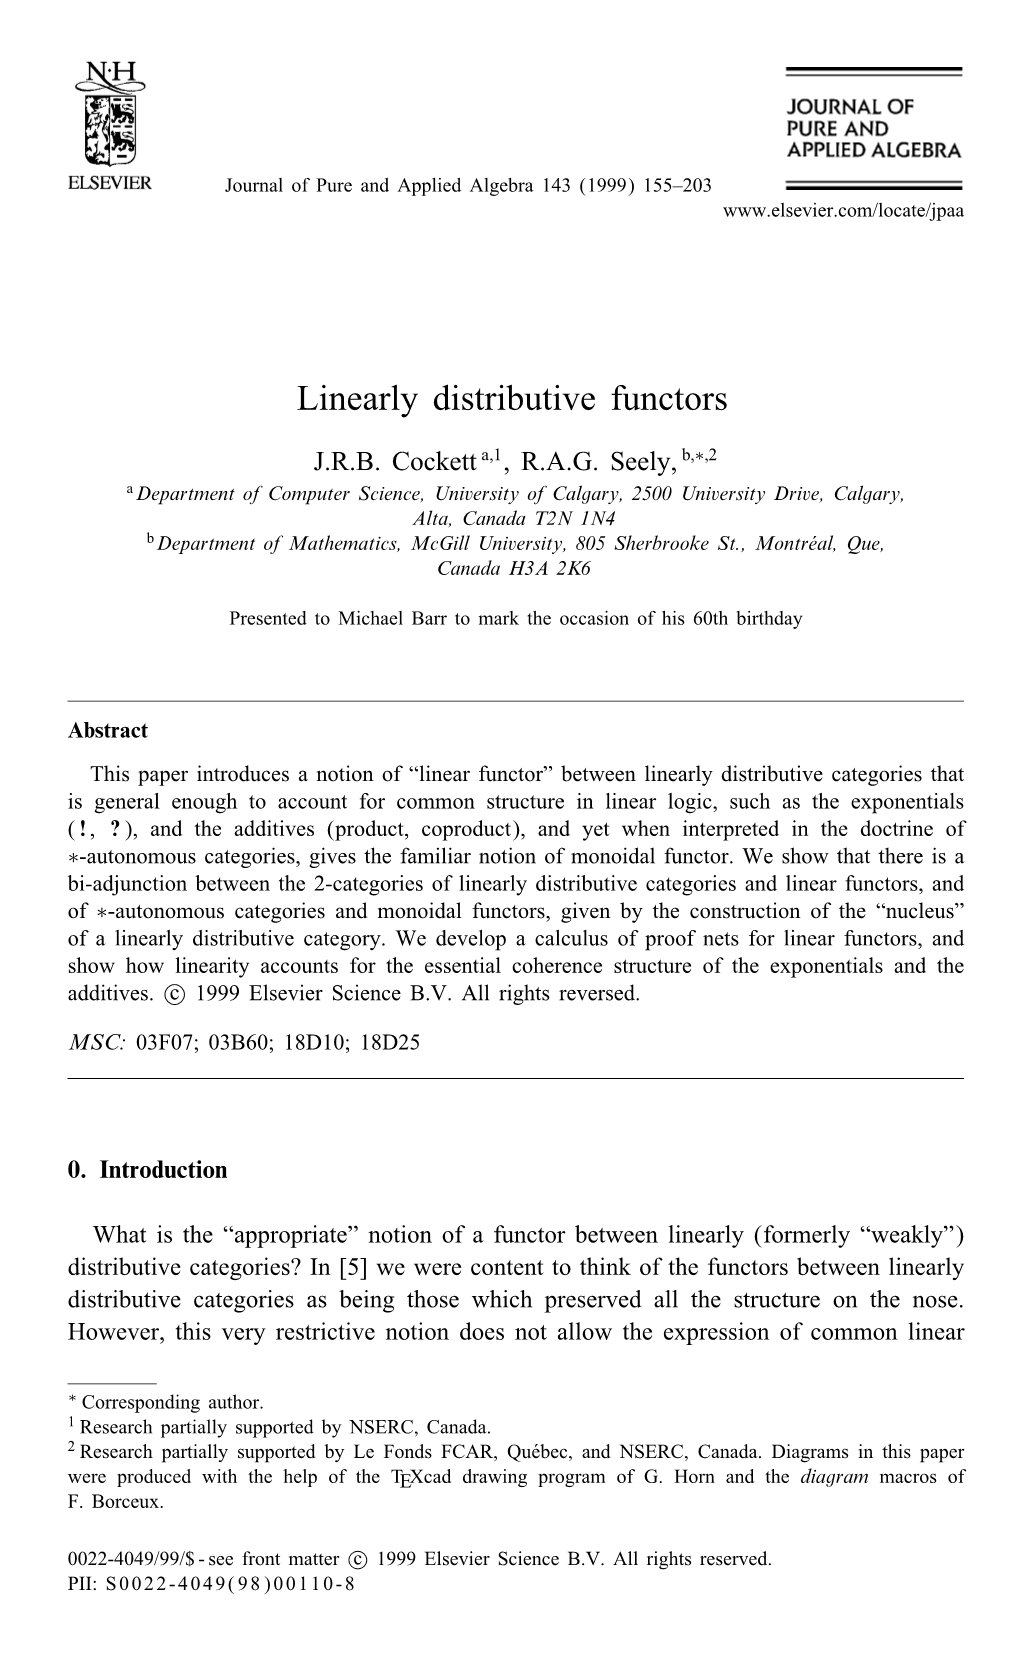 Linearly Distributive Functors